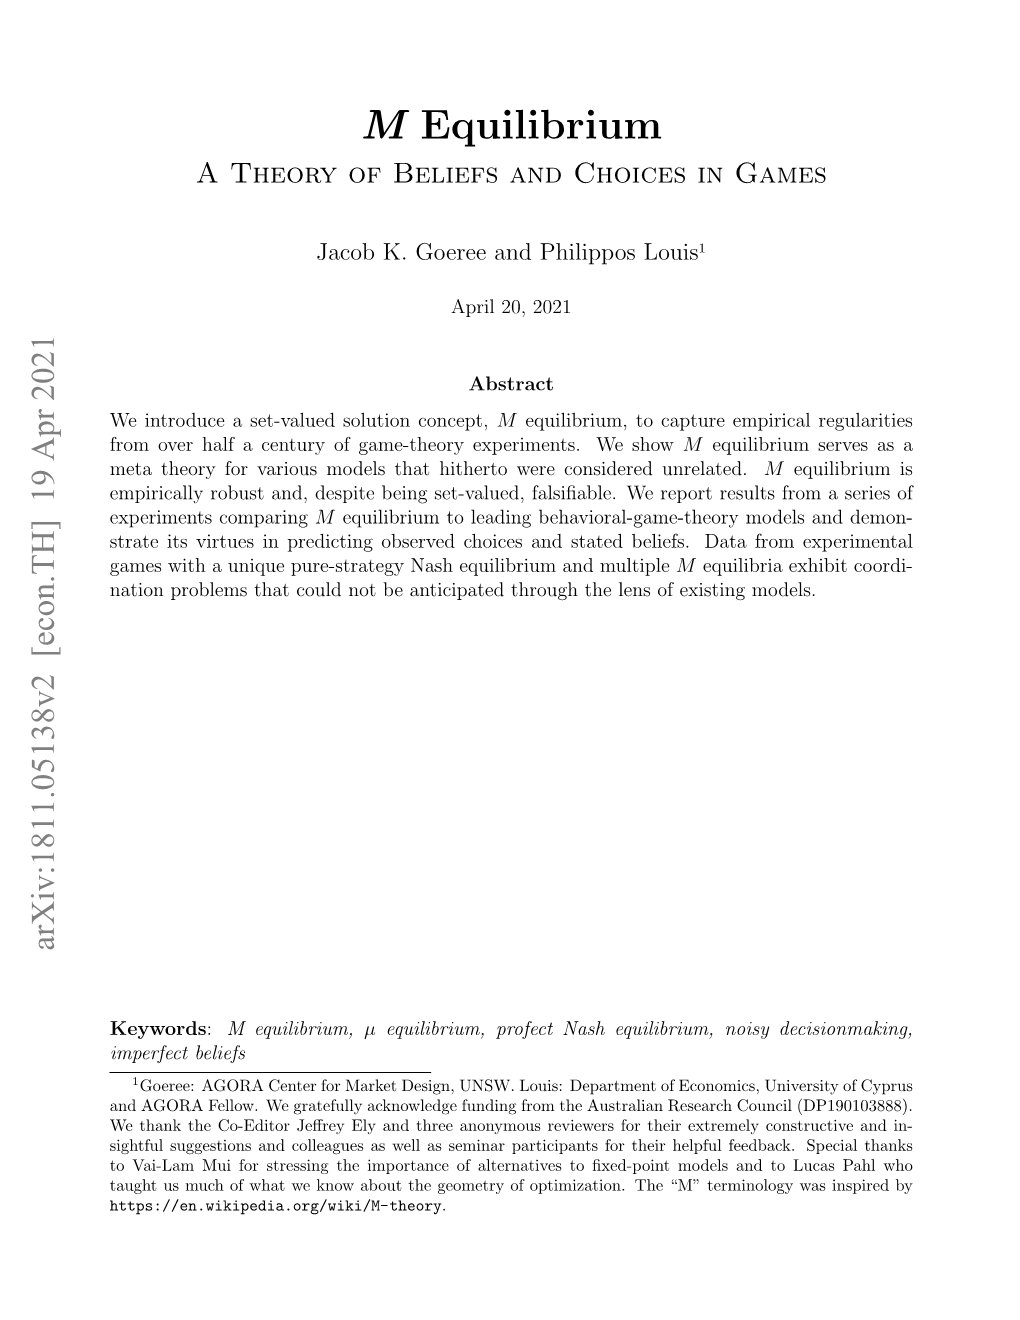 M Equilibrium a Theory of Beliefs and Choices in Games